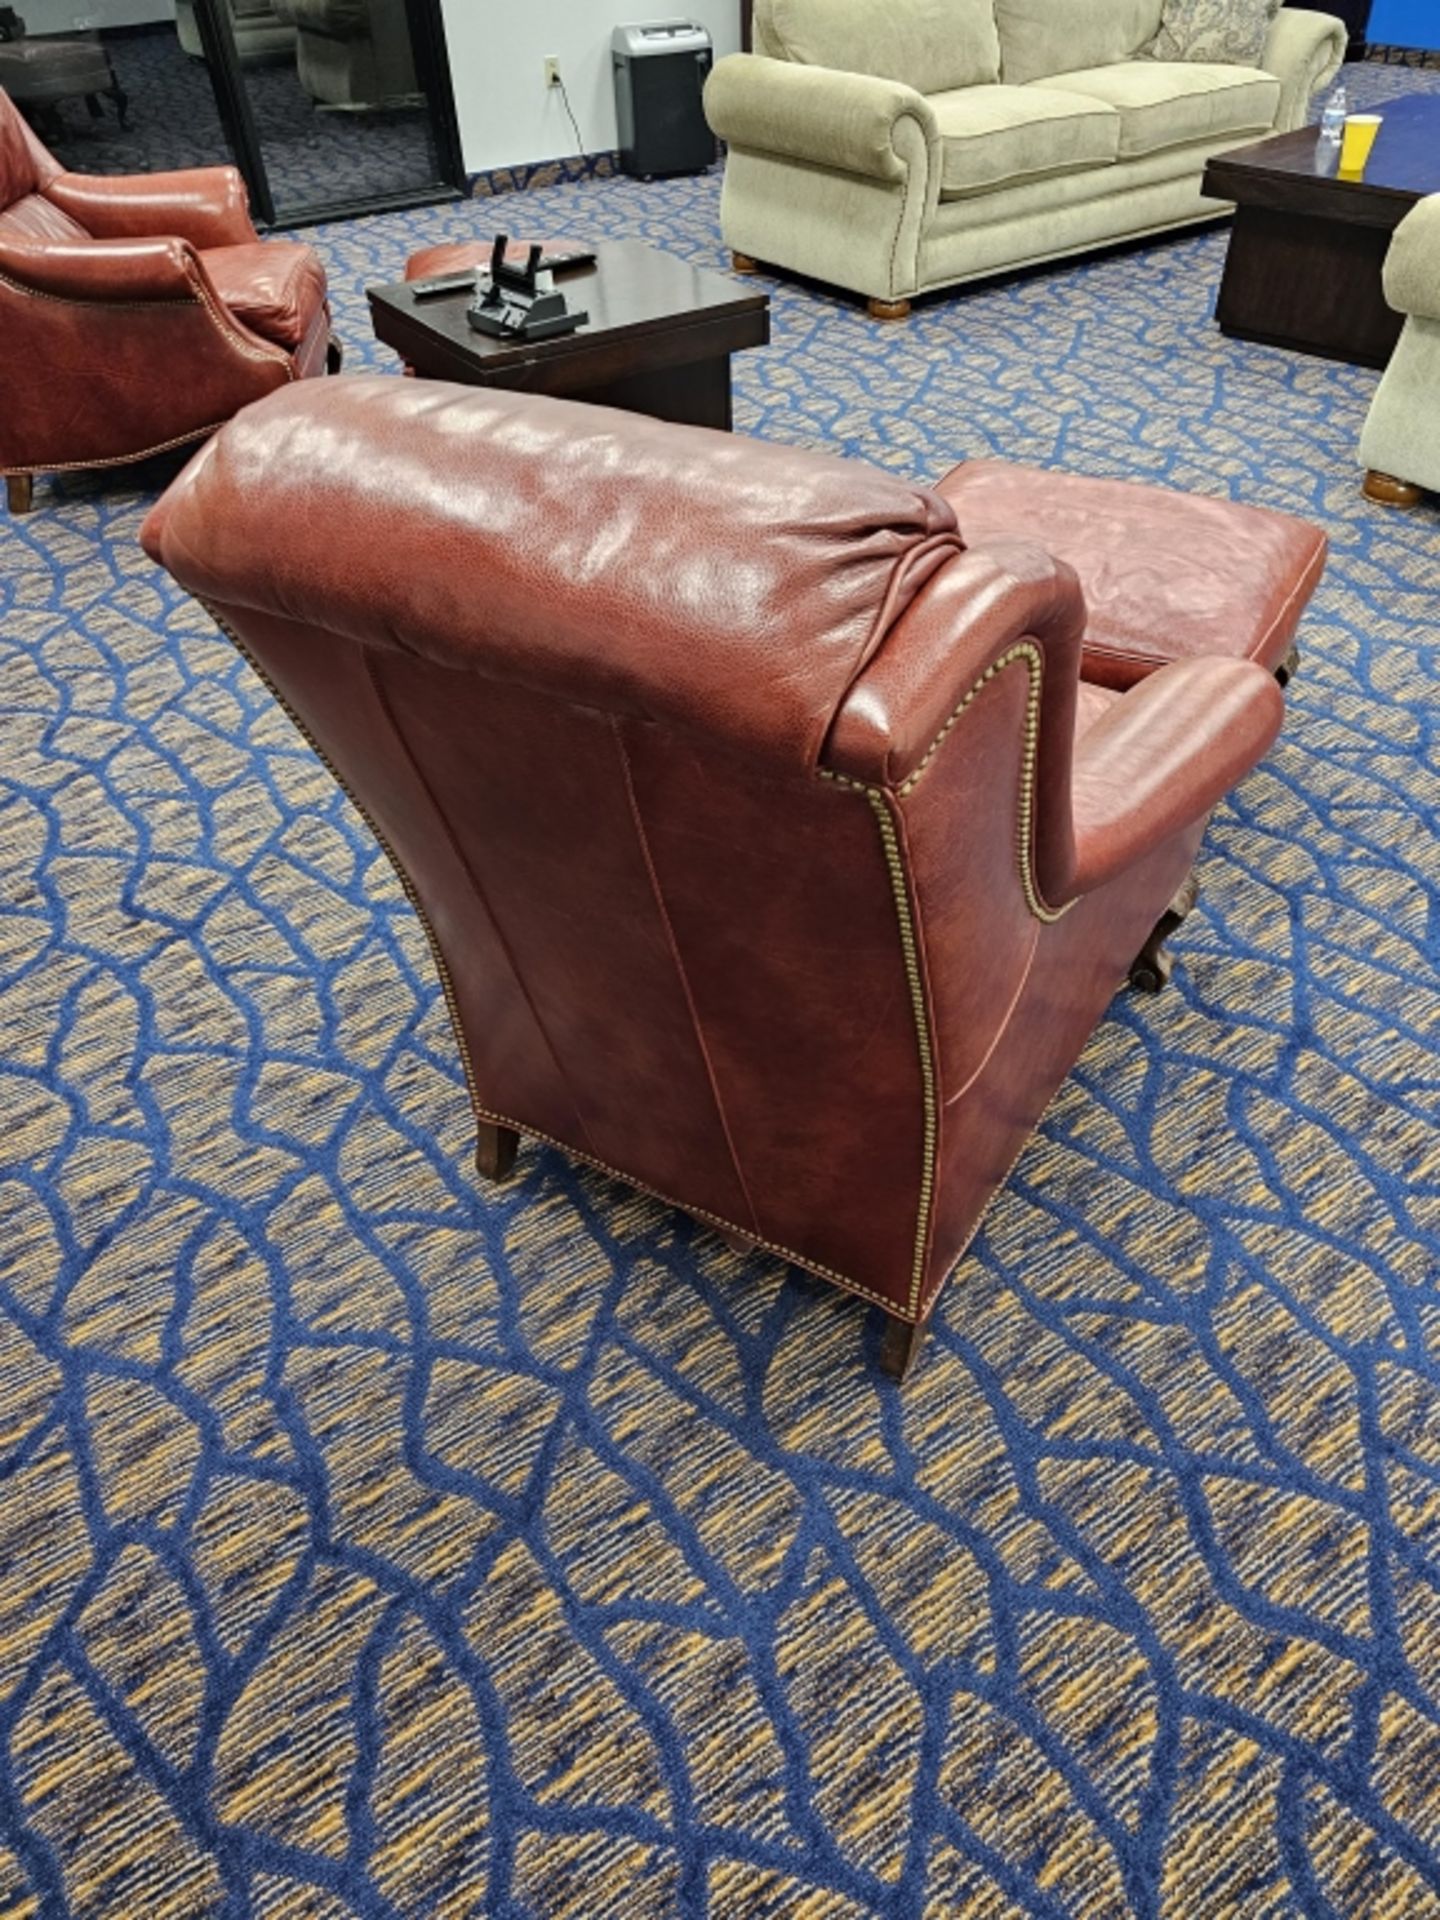 (2) Robb & Stucky Leather Chairs With Foot Stools - Image 2 of 11